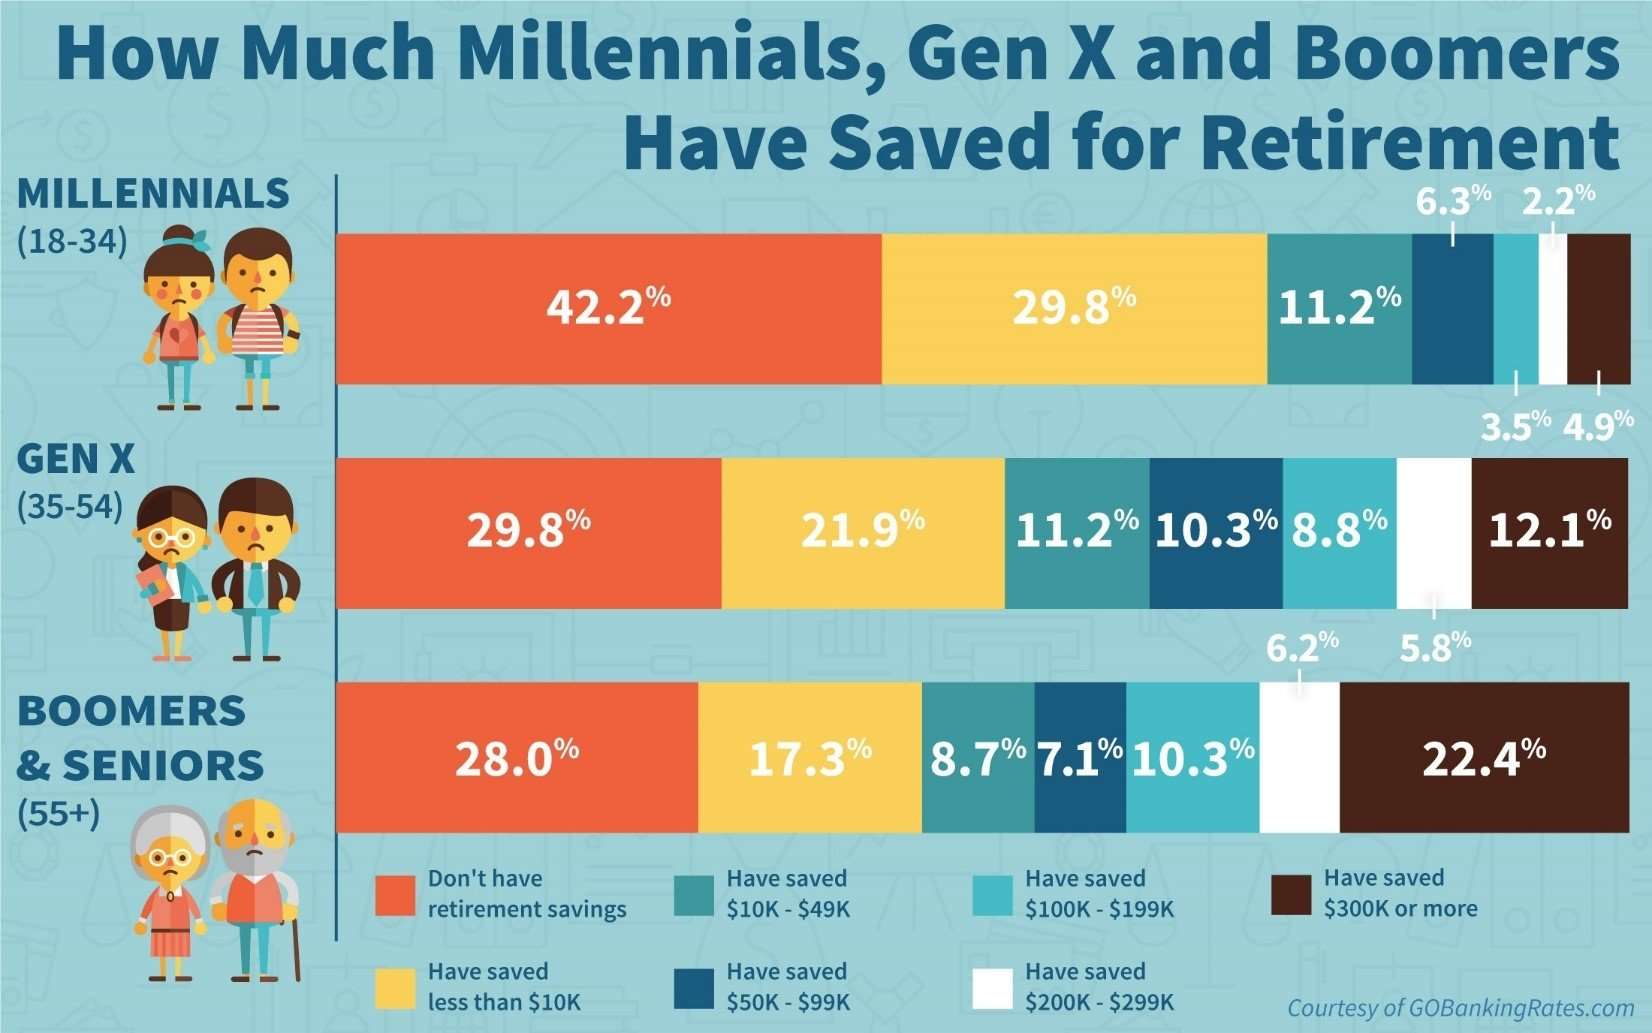 Is It Time To Retire Find Out With This Saving Money Chart